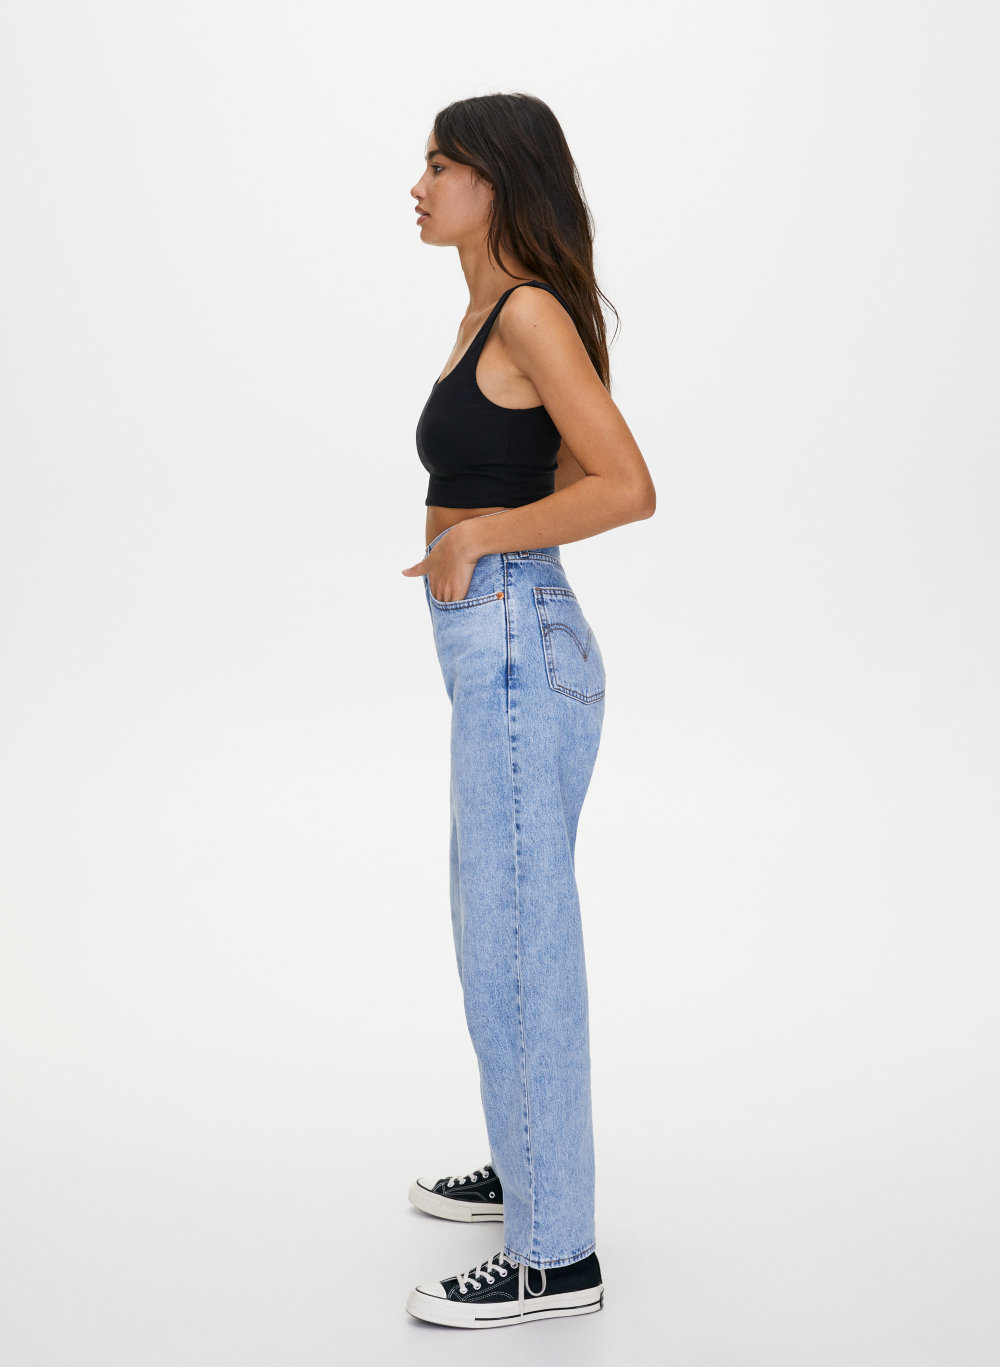 dad jeans for girls